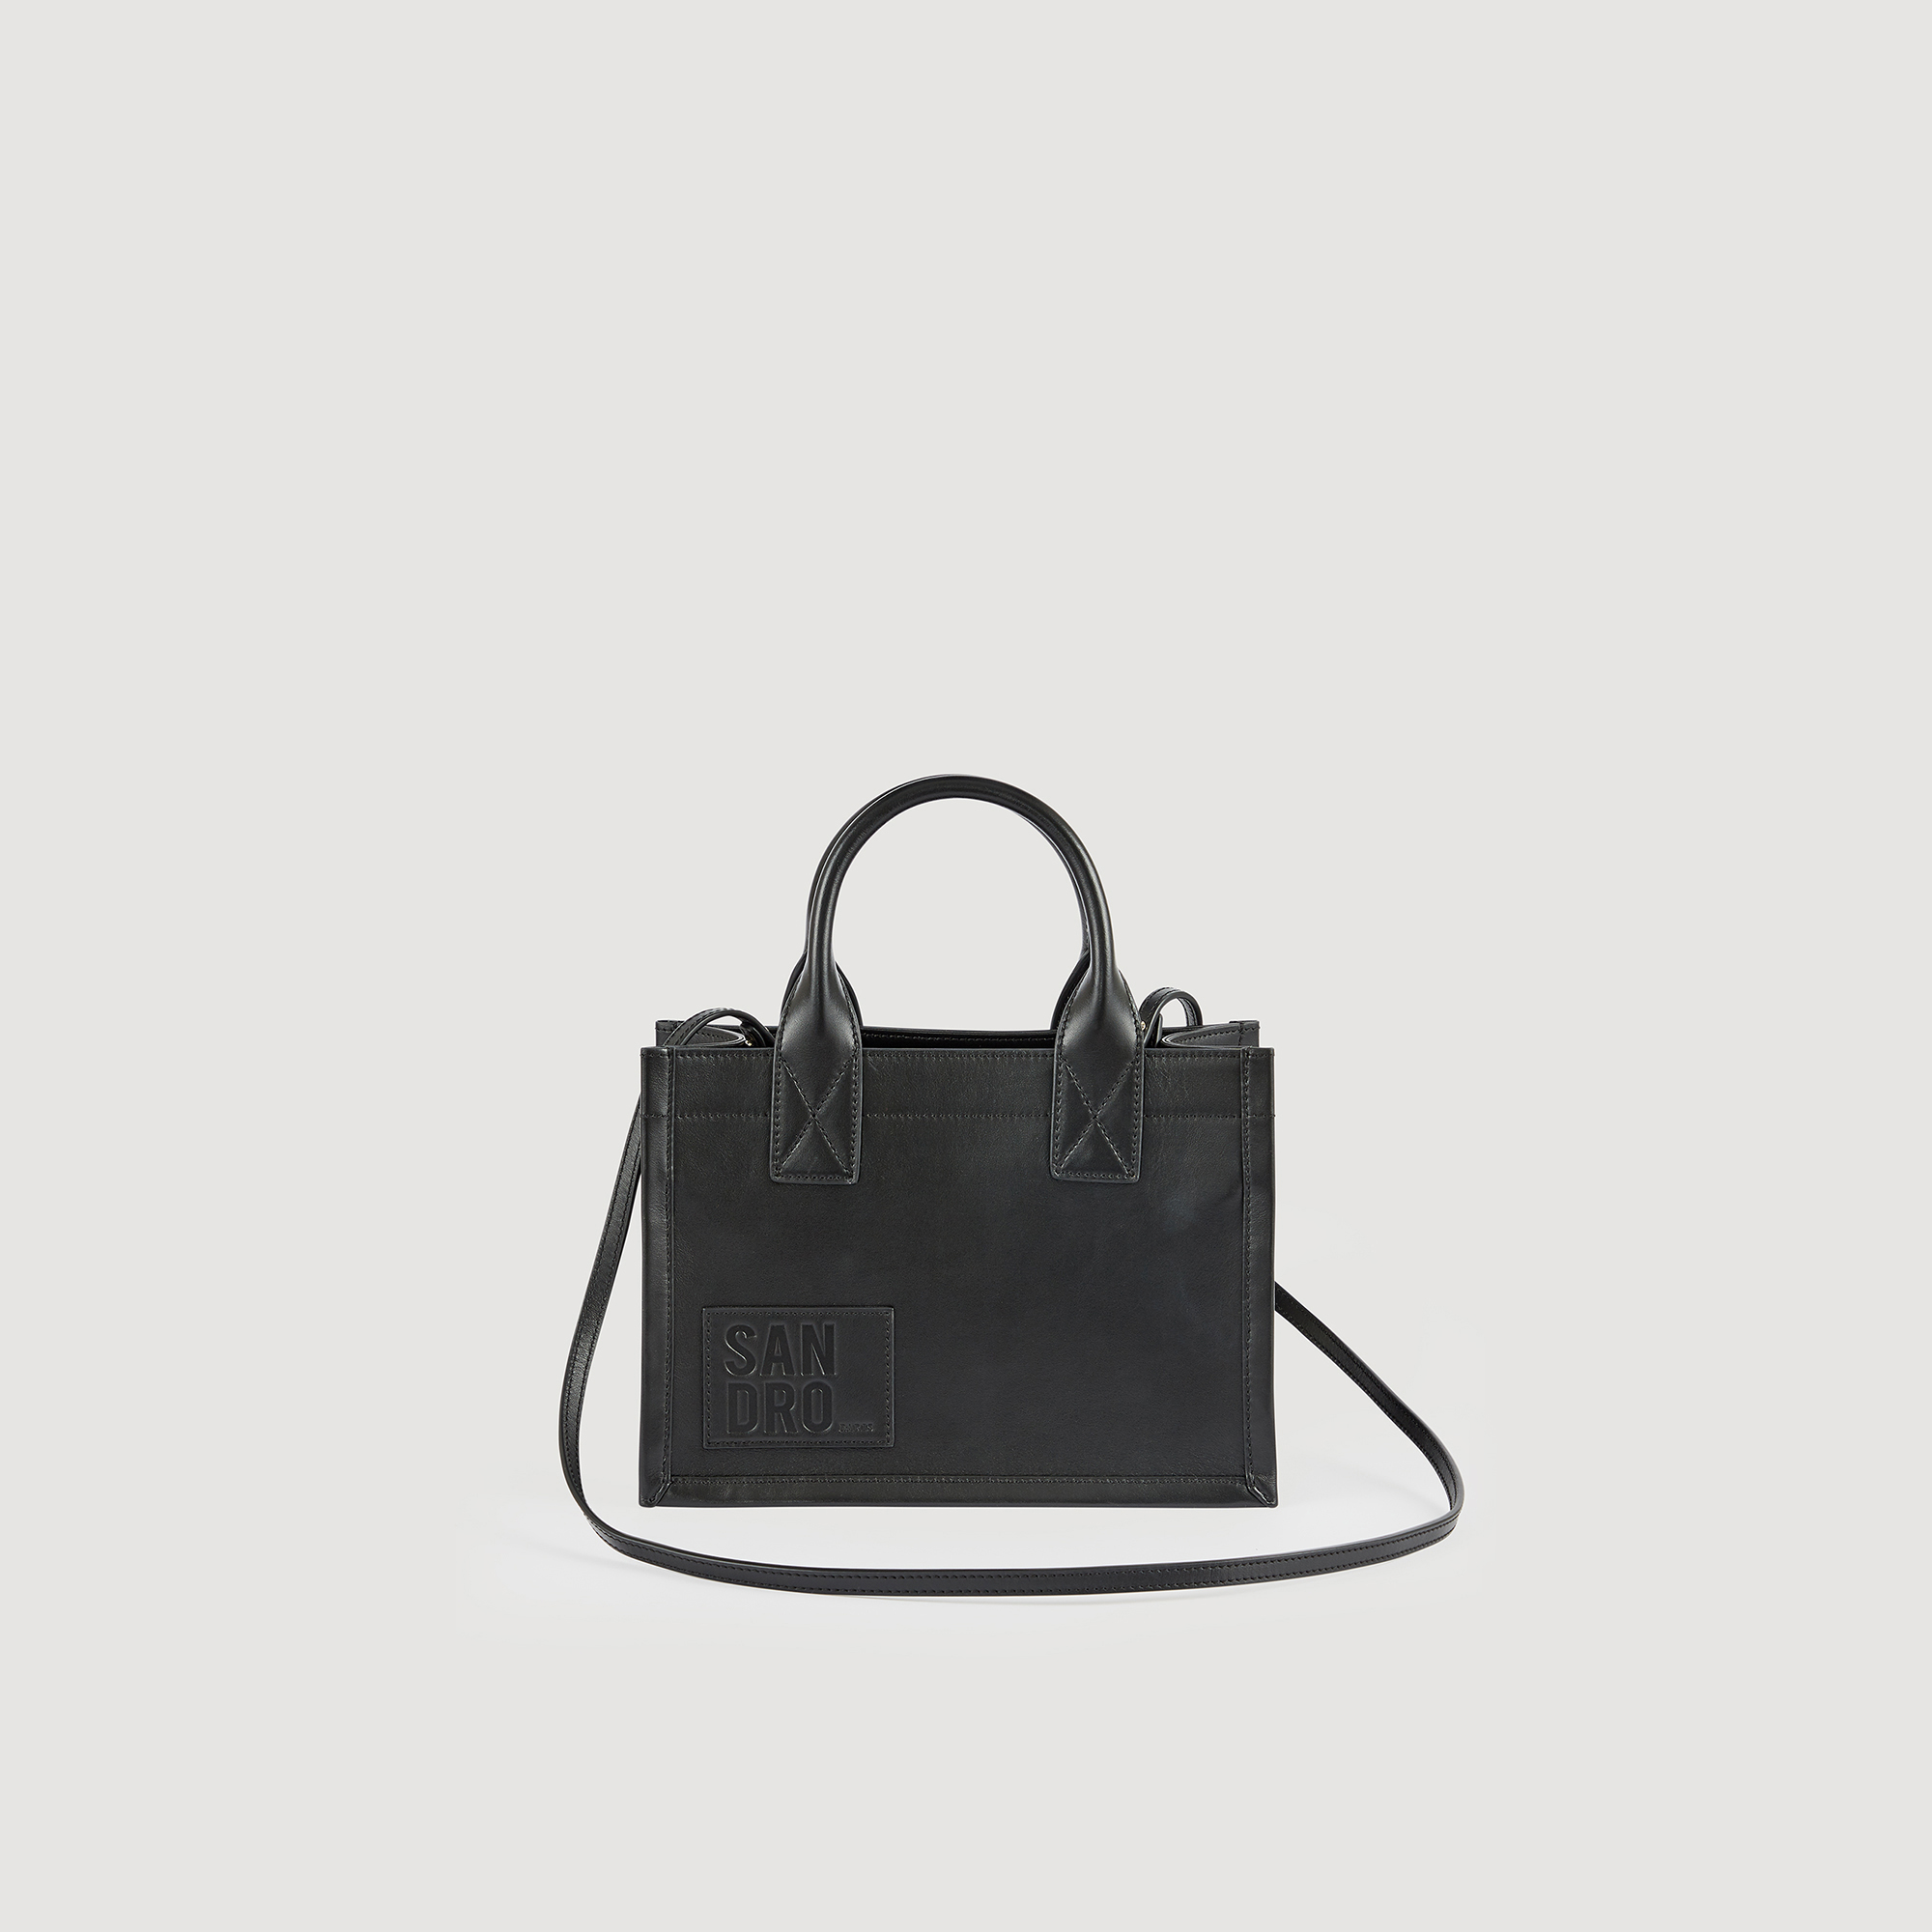 Sandro cotton Leather: Small smooth leather tote bag with a tone-on-tone embossed Sandro label, a magnetic fastening, small handles and an inner pouch